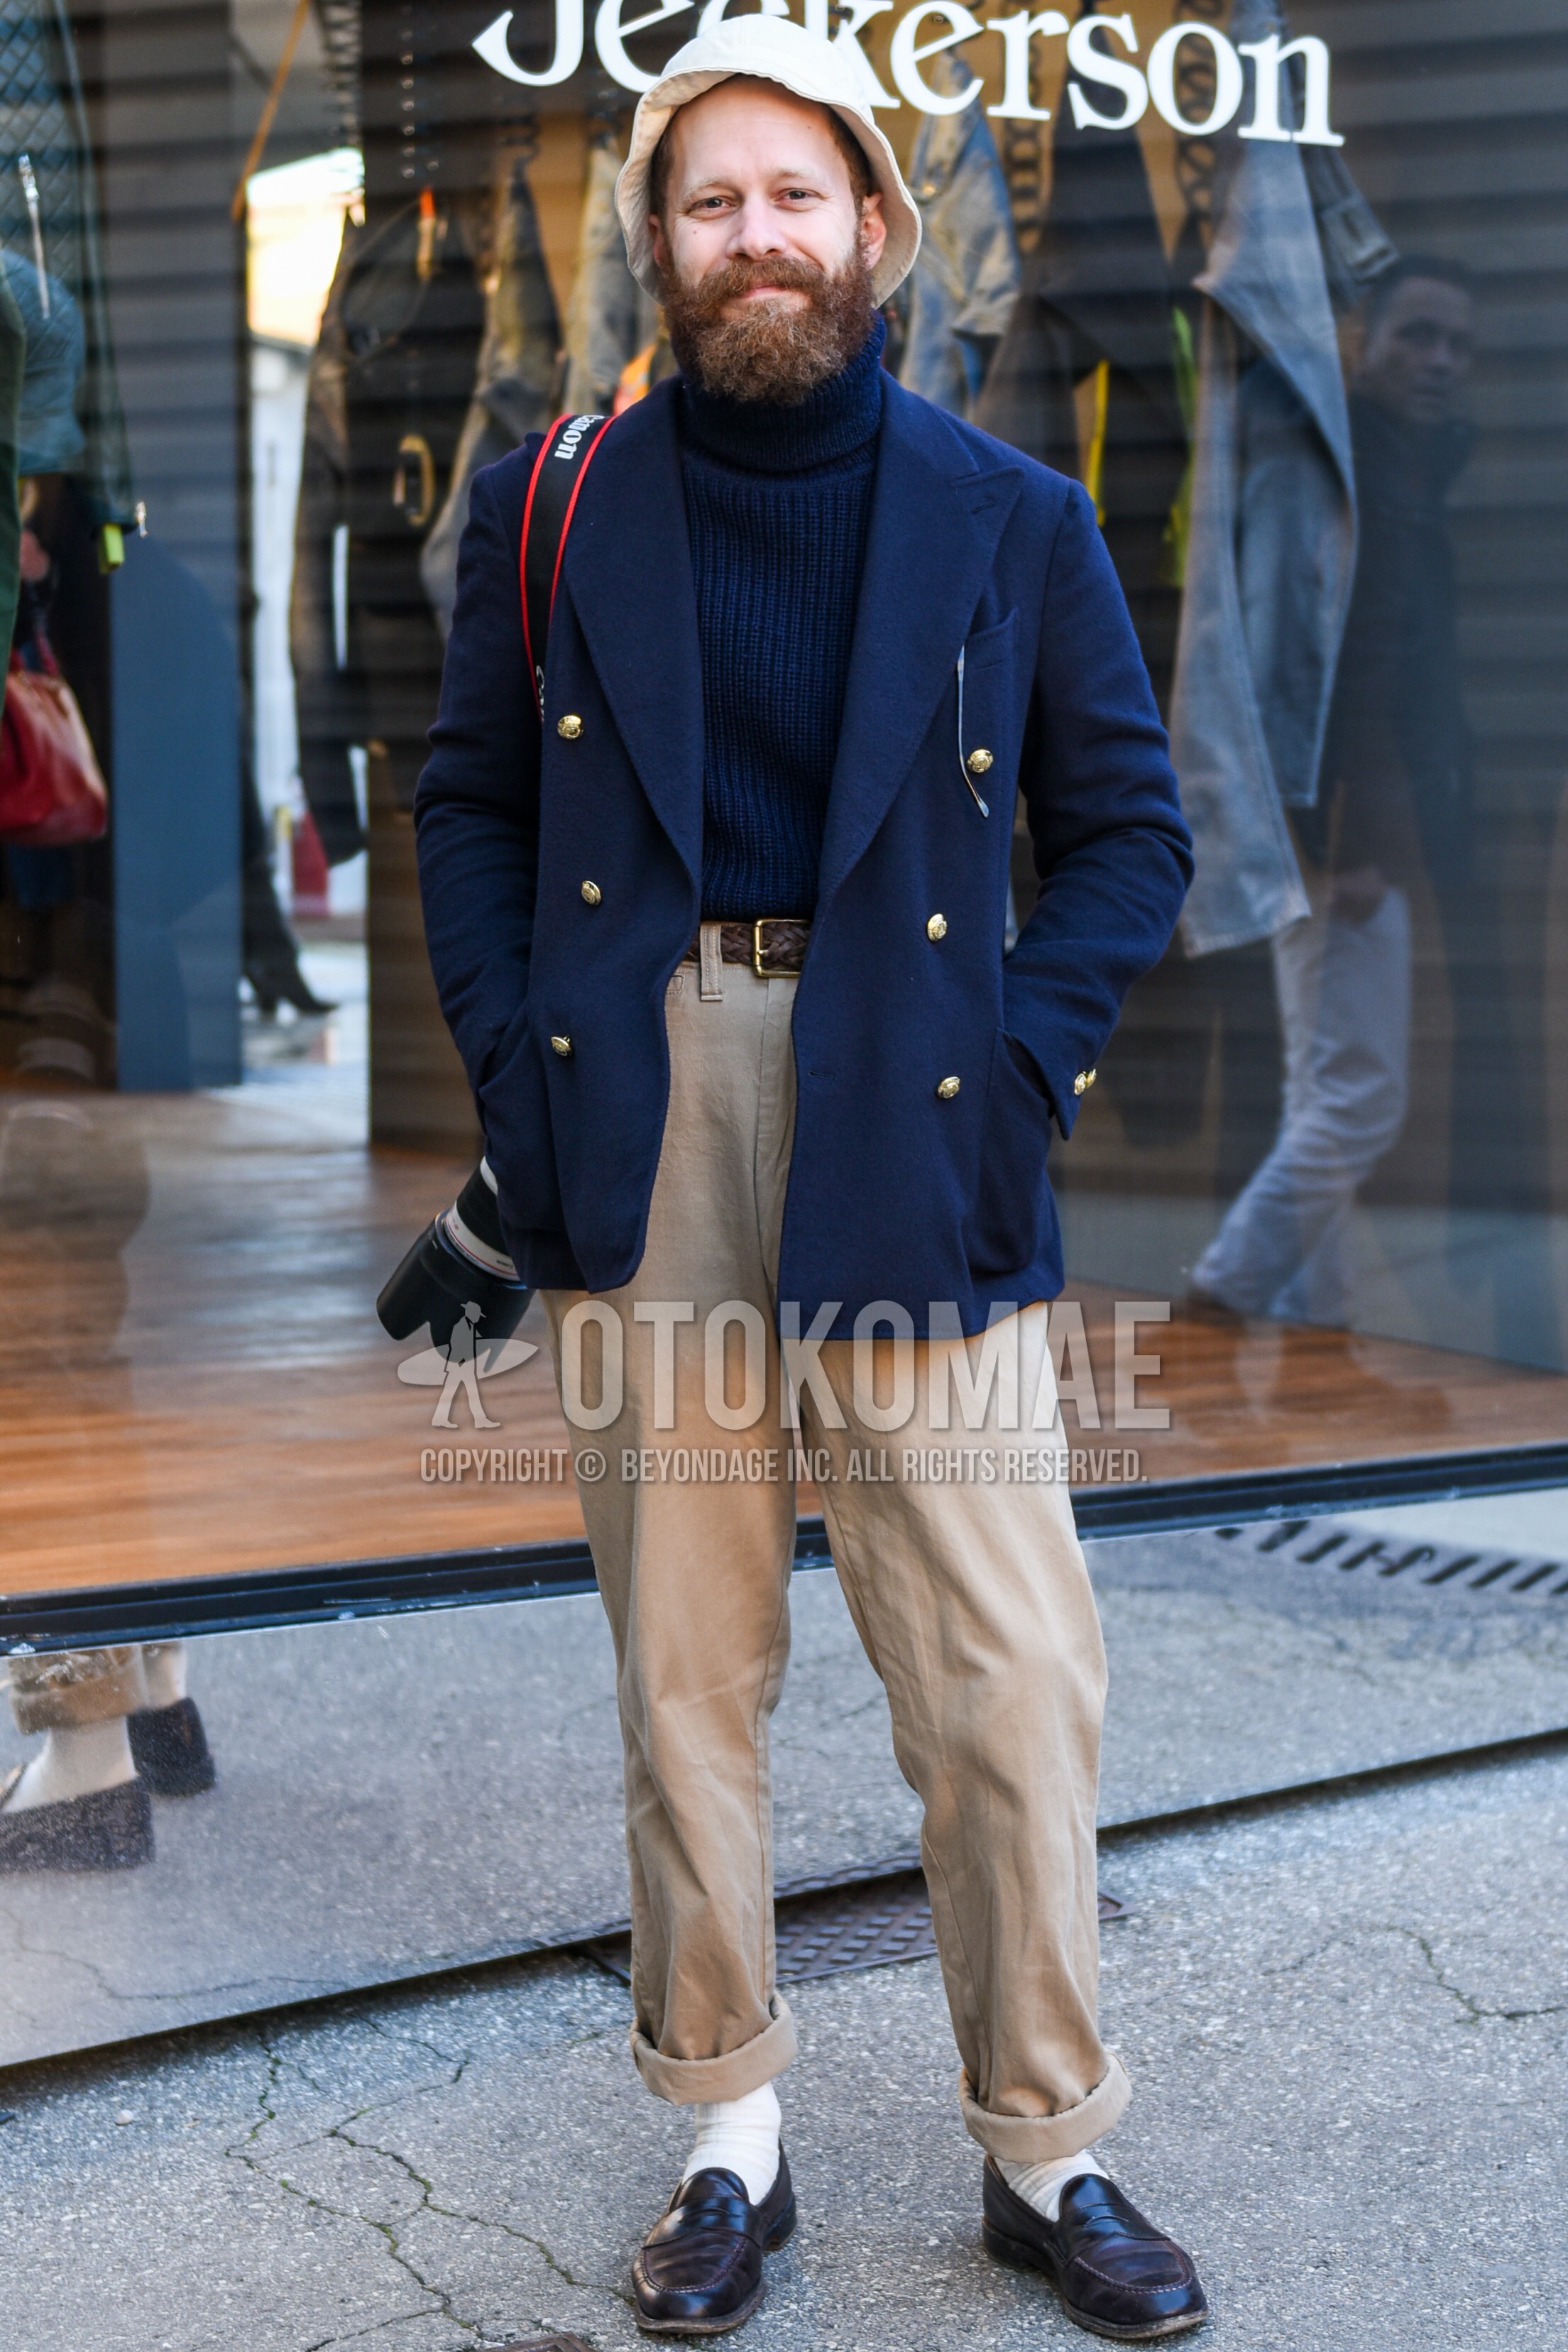 Men's autumn winter outfit with navy plain tailored jacket, navy plain turtleneck knit, brown plain braided belt, brown plain leather belt, beige plain chinos, white plain socks, black coin loafers leather shoes.